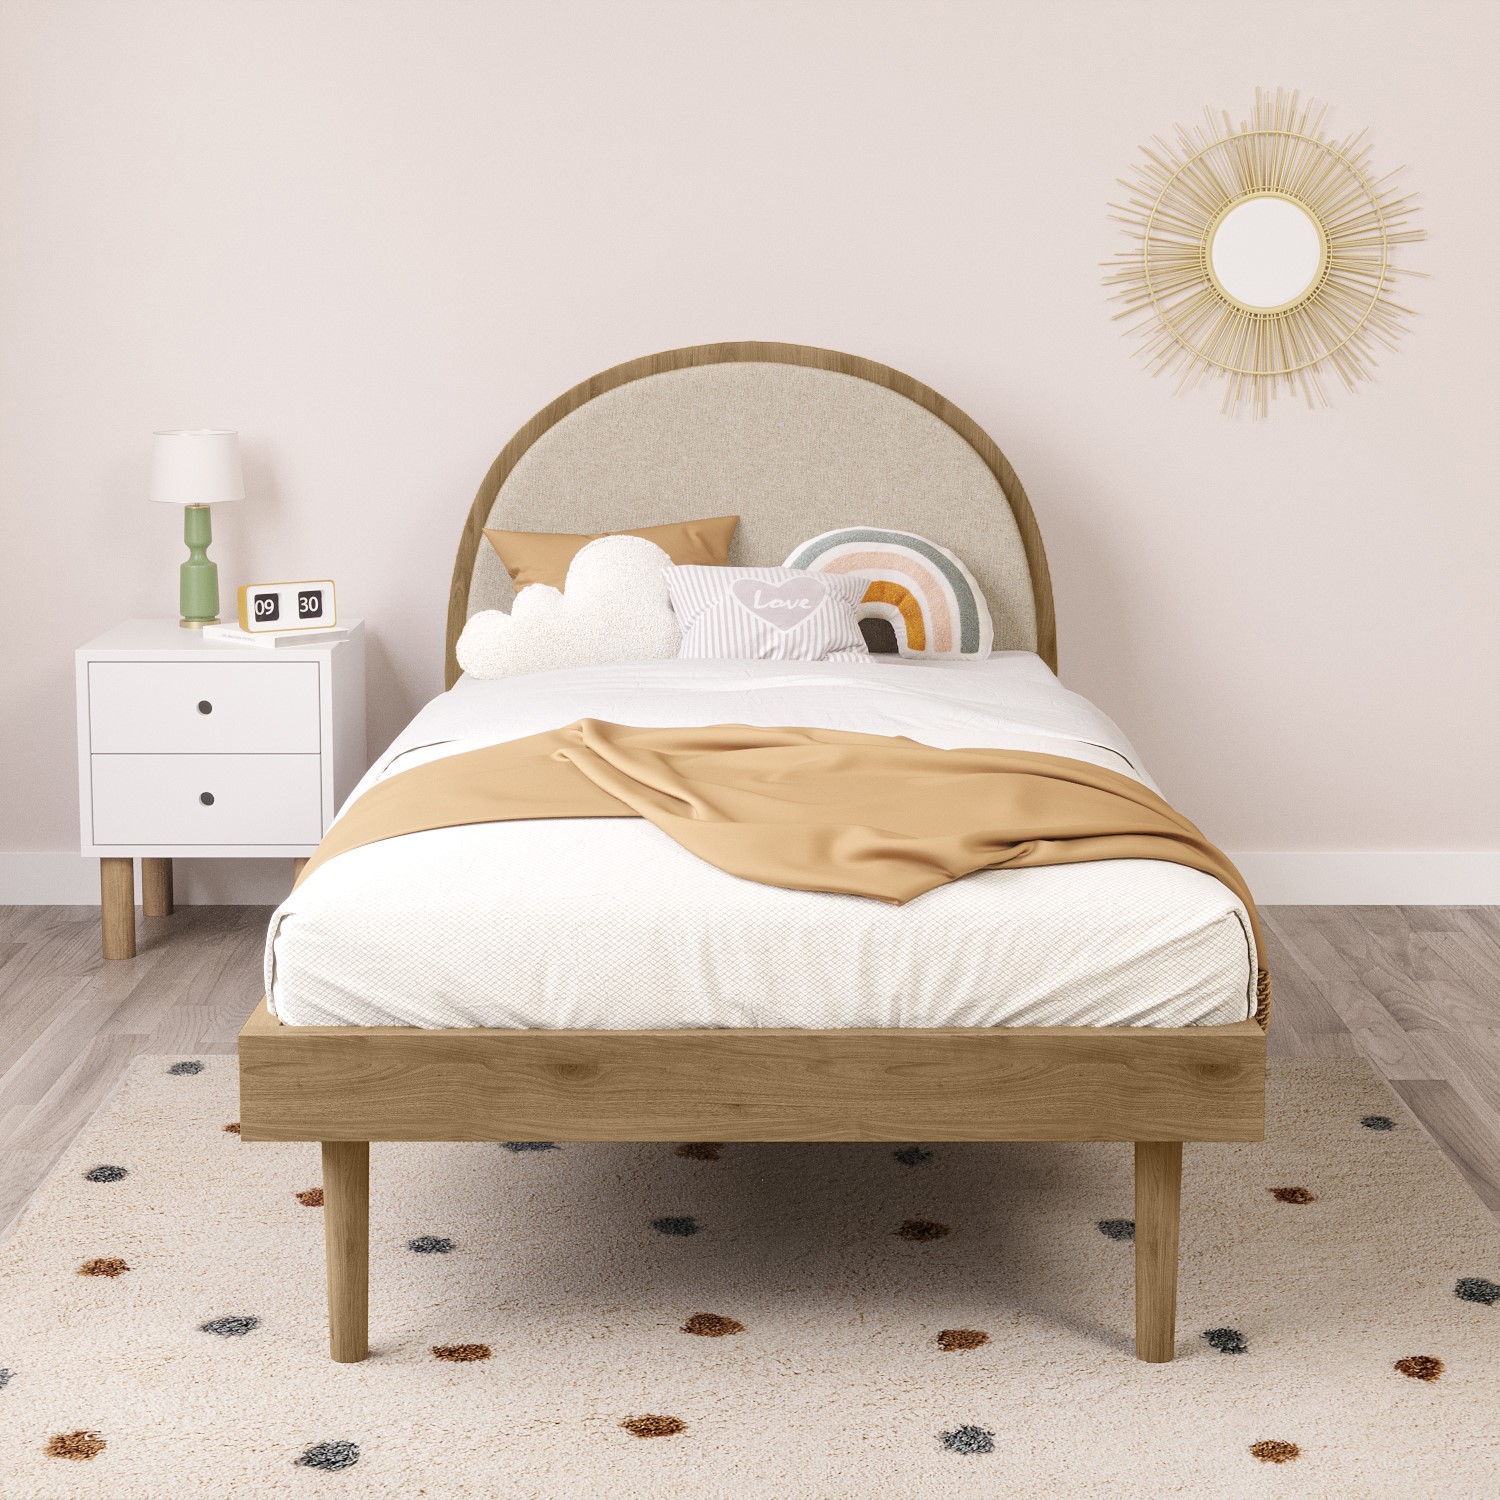 Read more about Single wooden bed frame with beige linen headboard cara